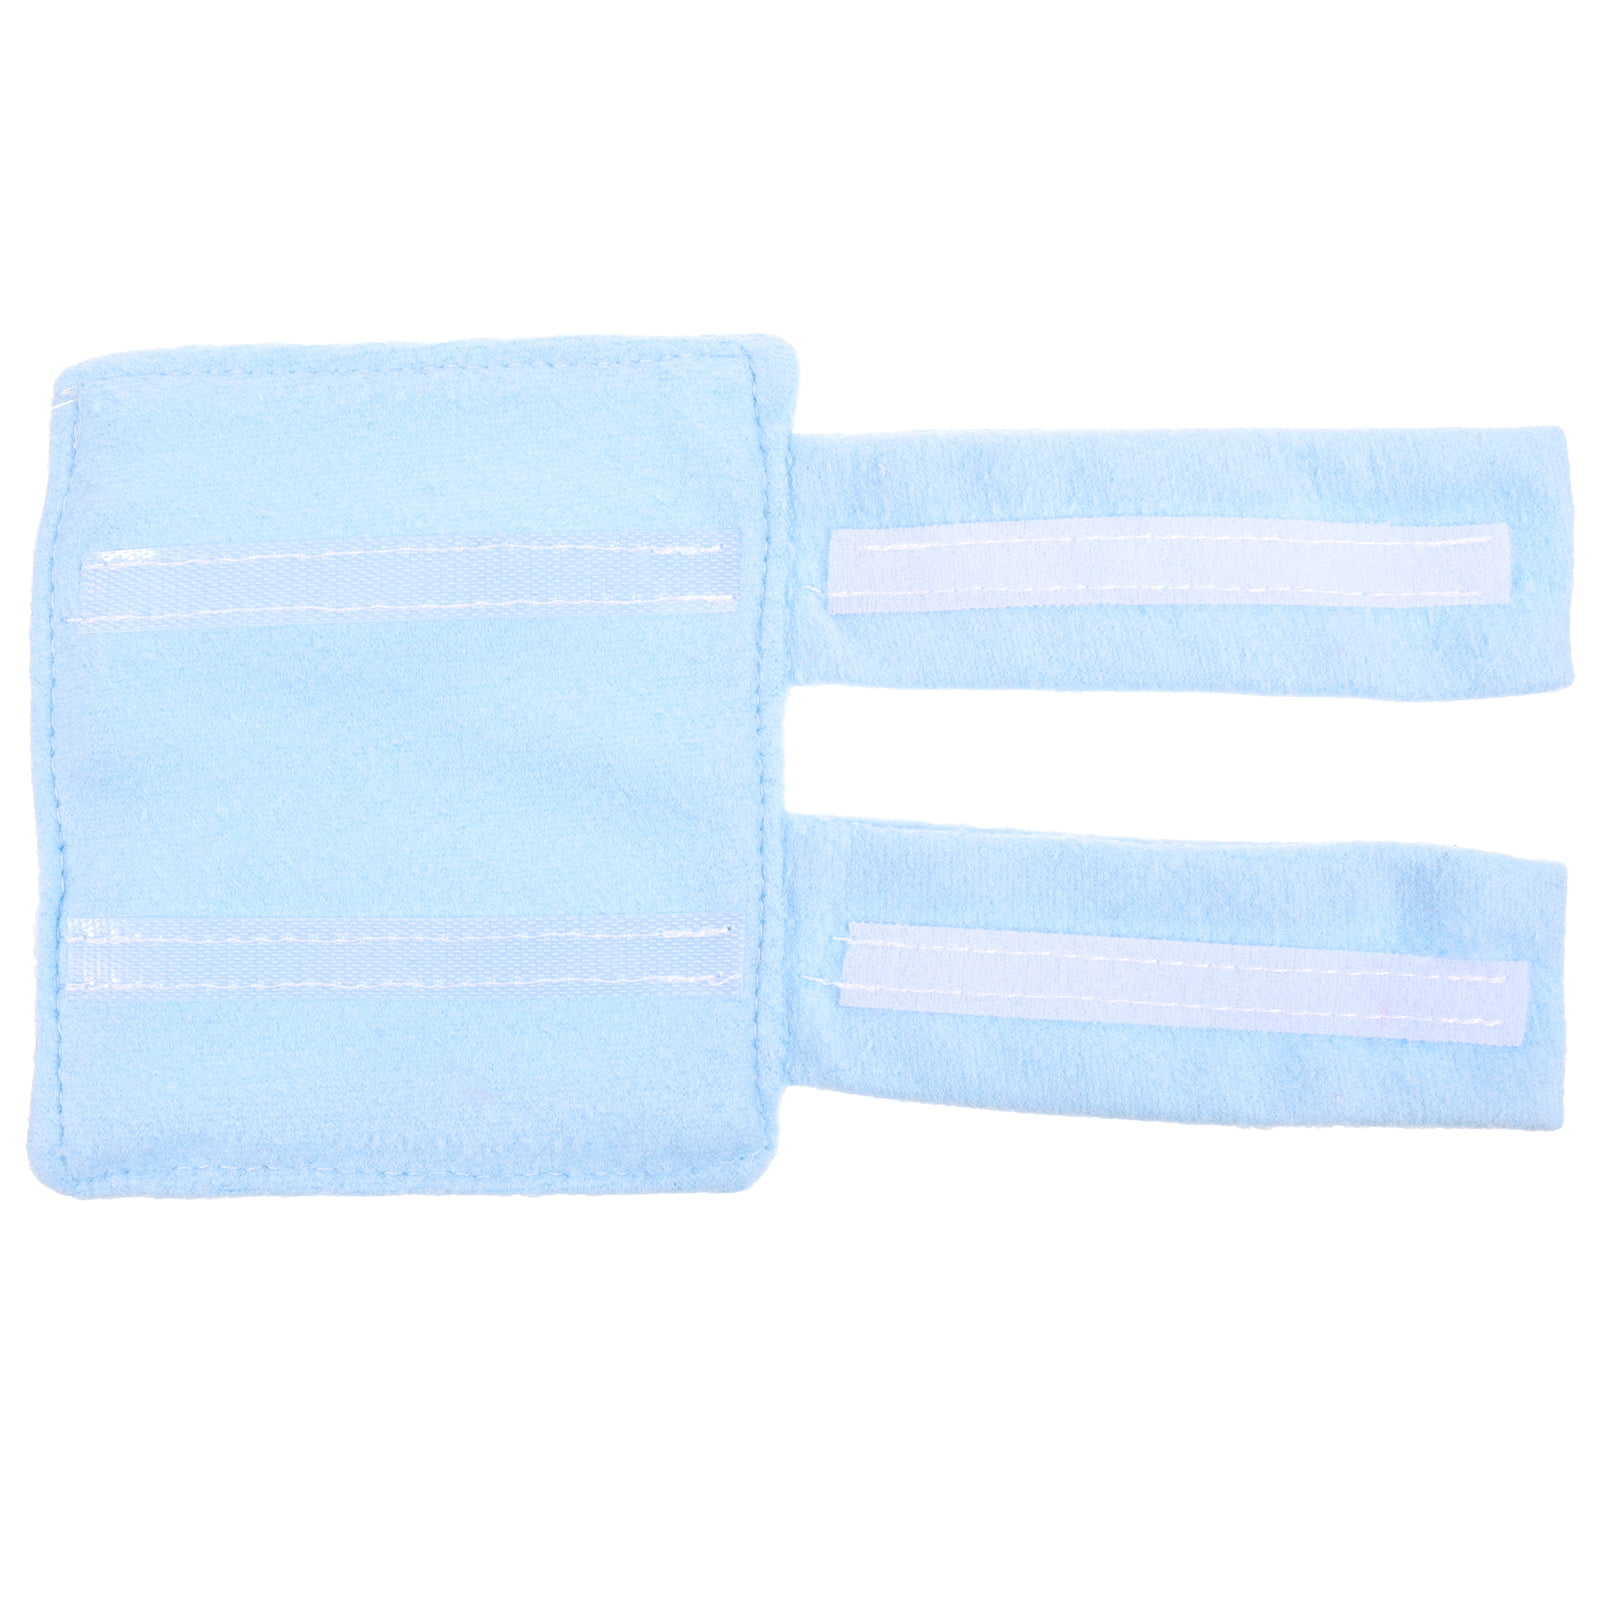 4 Pack Pacemaker Incision Protector Post Surgery Bra Strap Pad